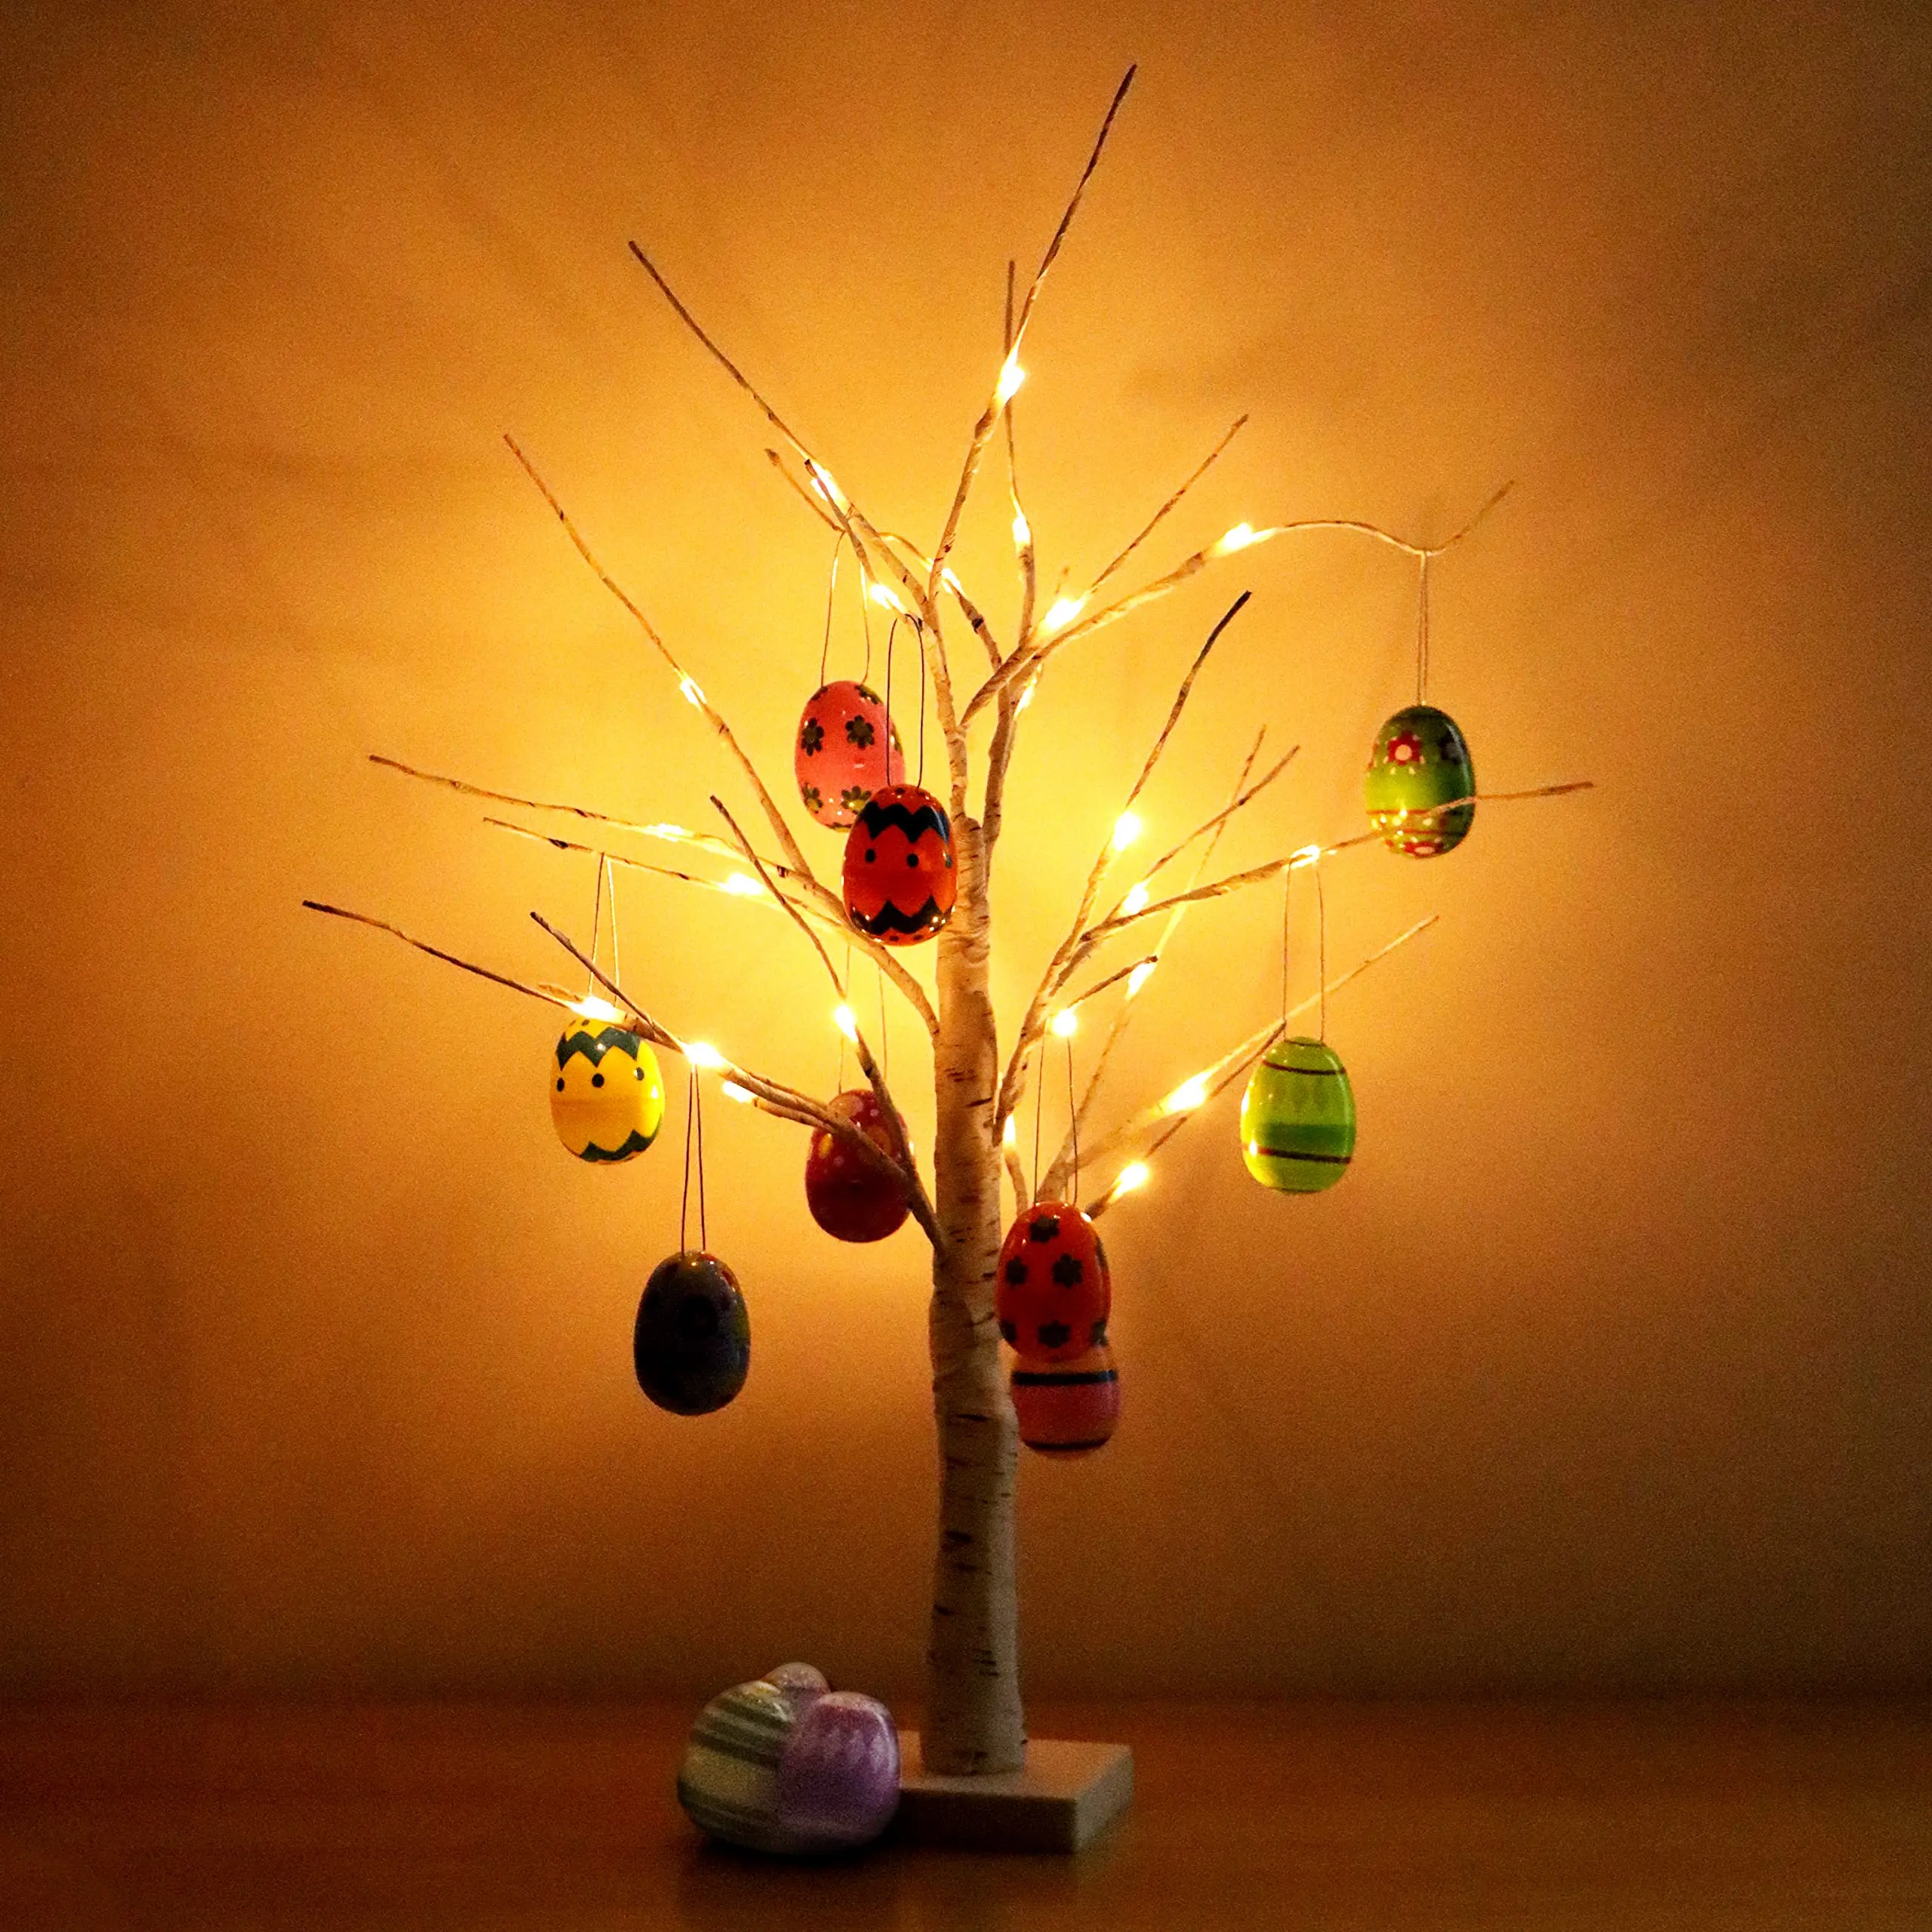 Easter Lighted Birch Tree Decorations Hanging Easter Eggs for Party Festival Wedding Holiday Home Decor